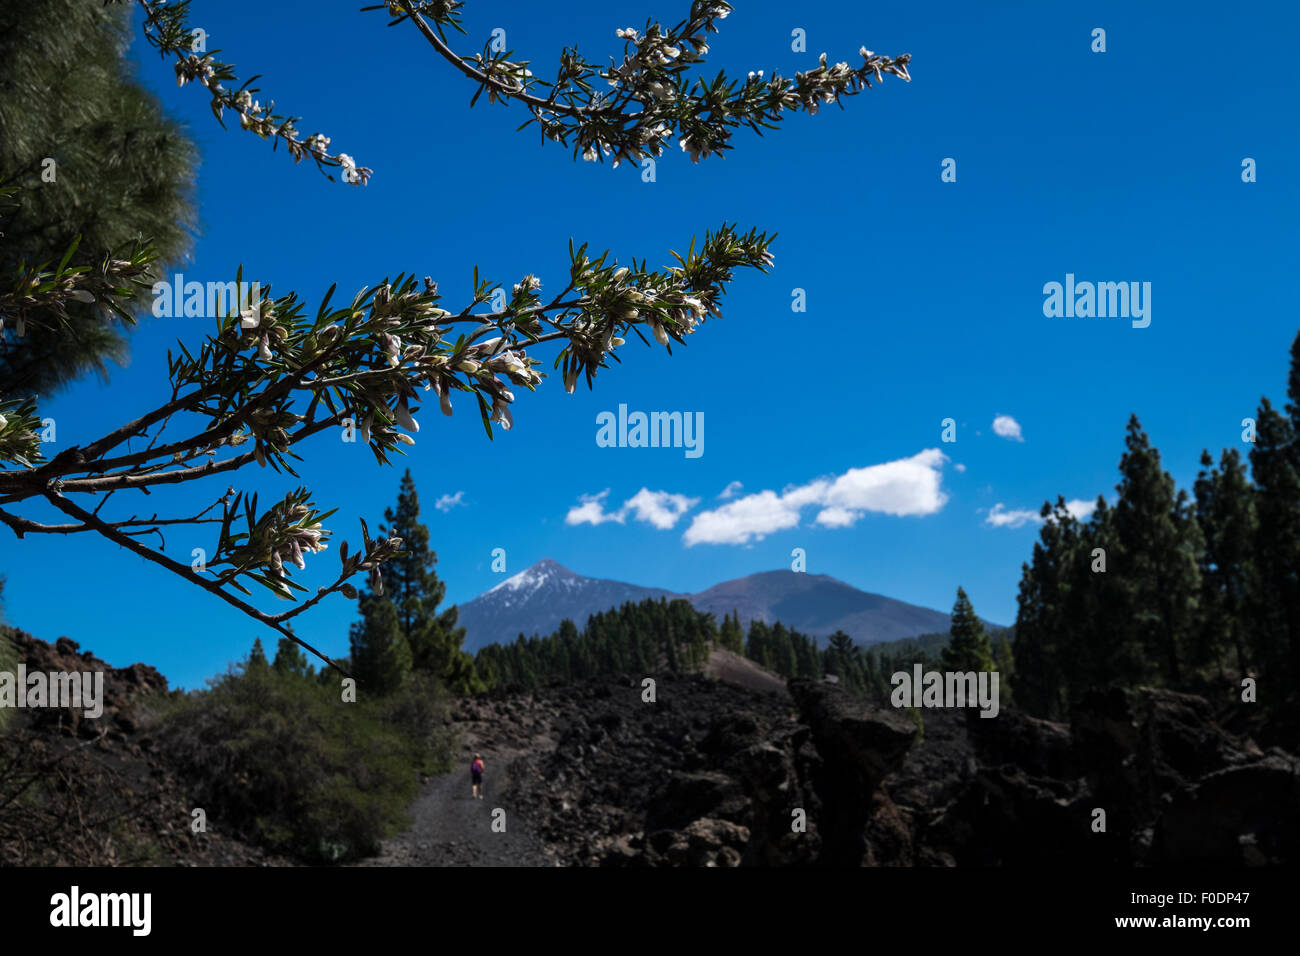 Chamaecytisus proliferus flowering shrup common name Tagasaste or escobon in the pine forest on the way to Teide, Tenerife, Cana Stock Photo